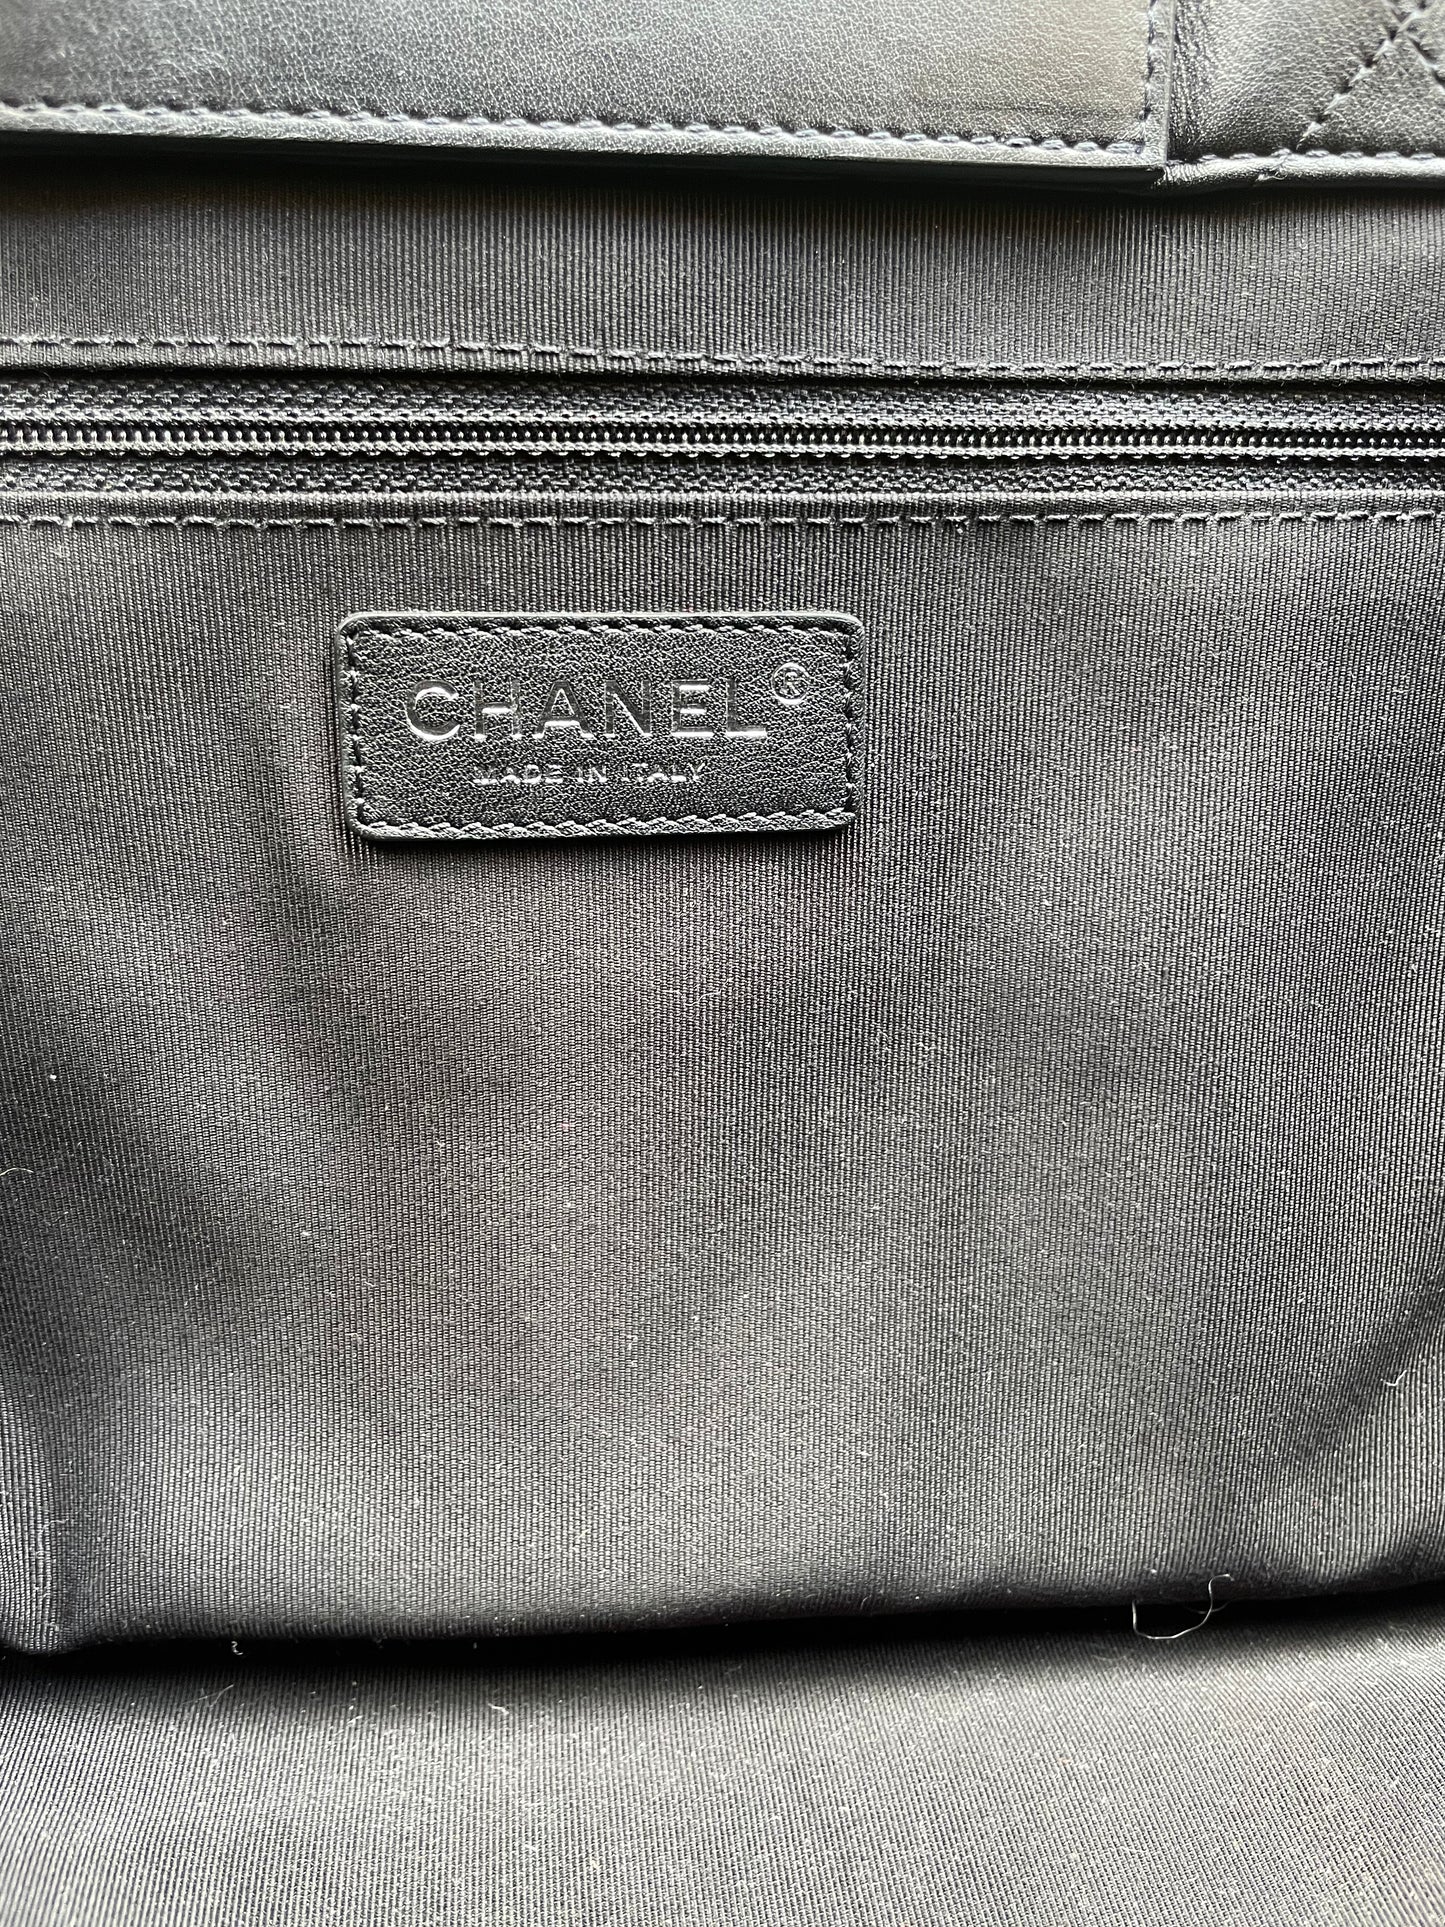 Chanel "Easy Shopping Tote" - Second Nature Boutique